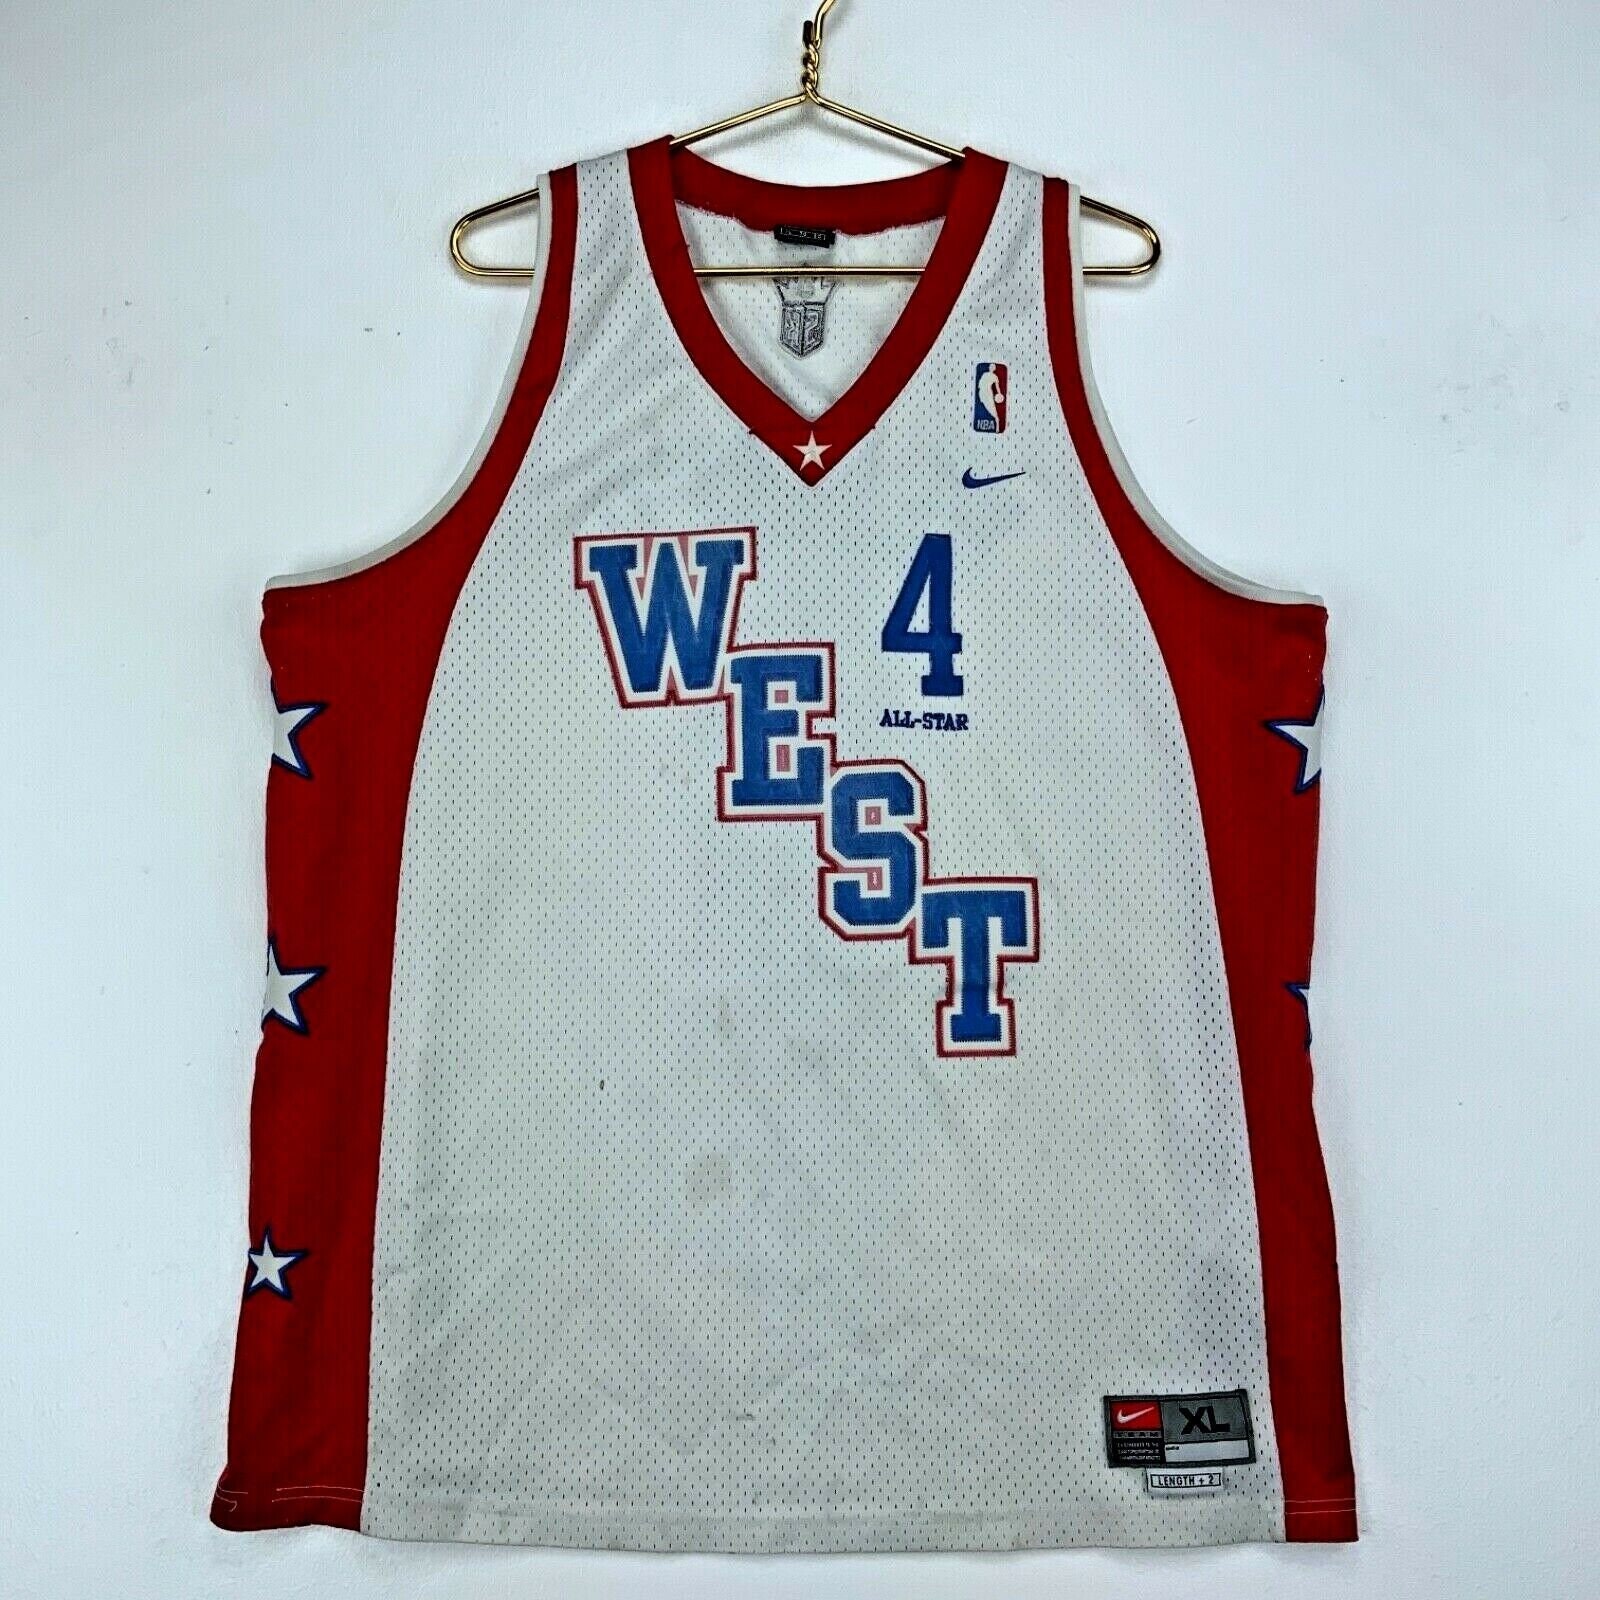 Chris Weber 4 West All Star Nike Vintage Jersey Size XL White -  Norway